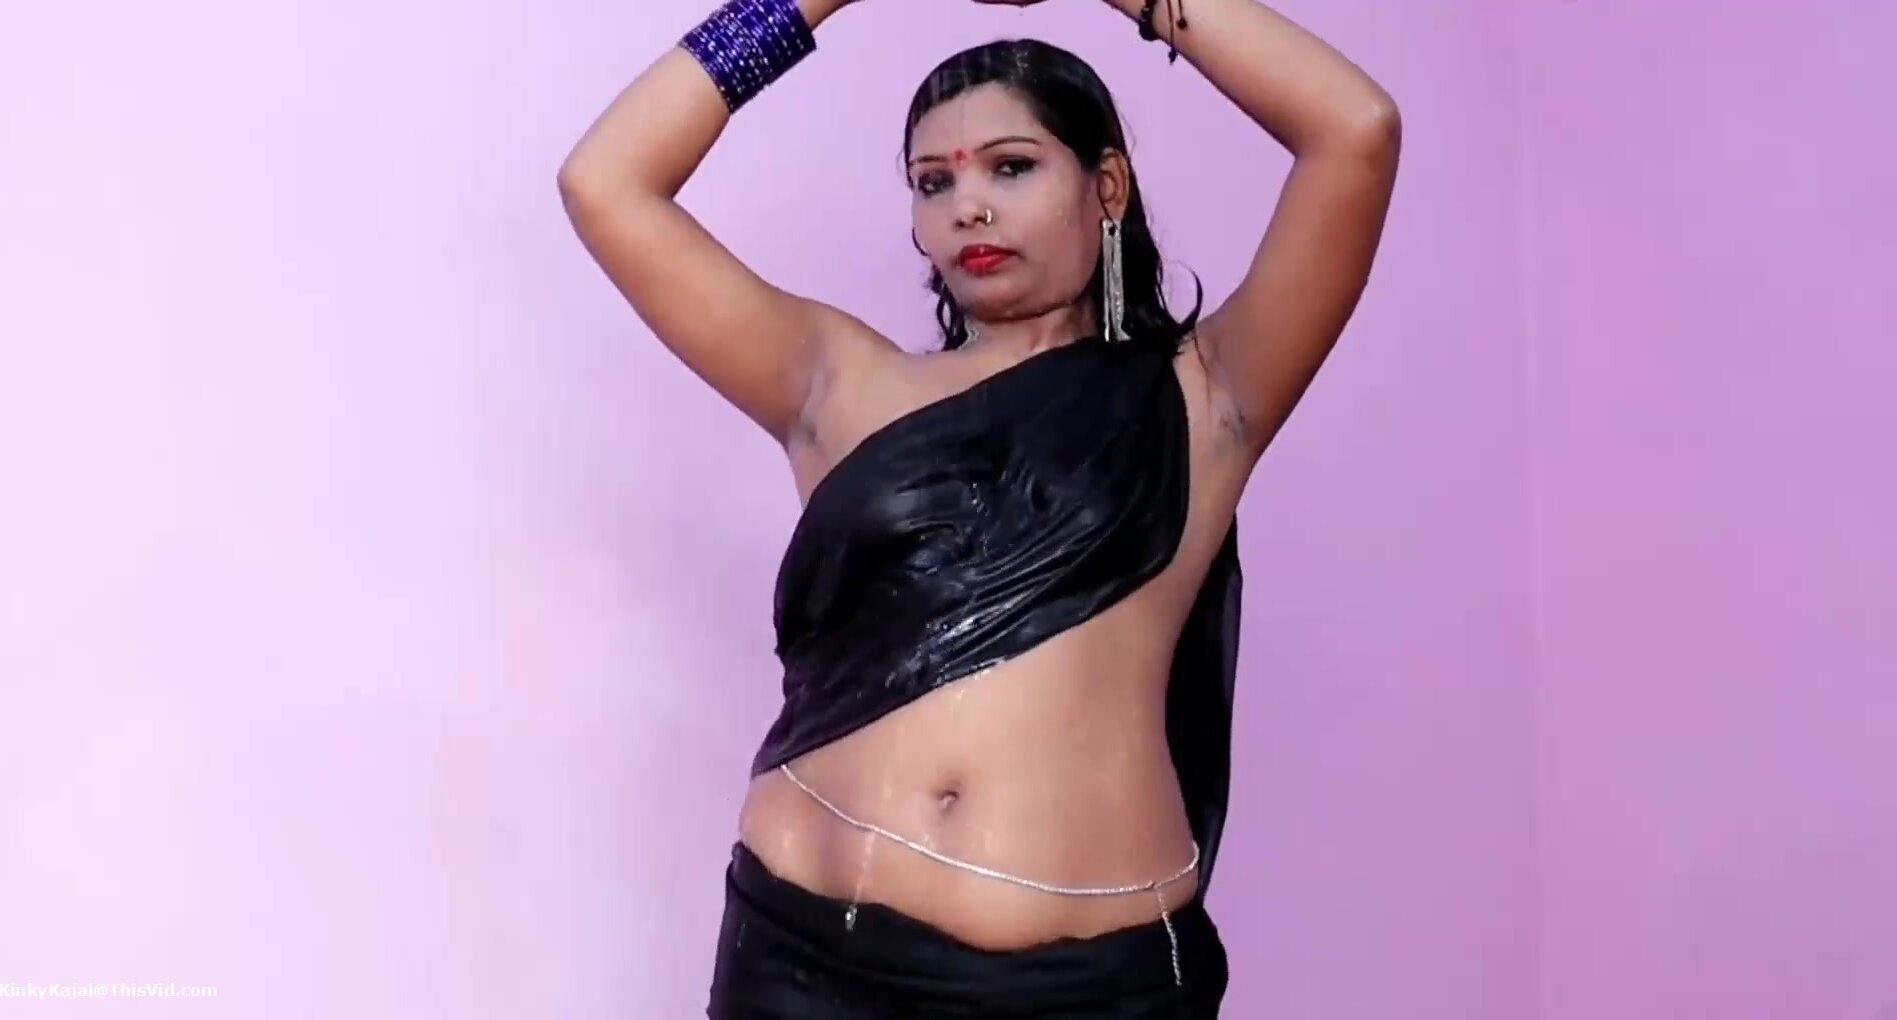 India Sexiest And Naked Actress - Sexy Indian lady Full Nude Bathing in Black Saree - ThisVid.com